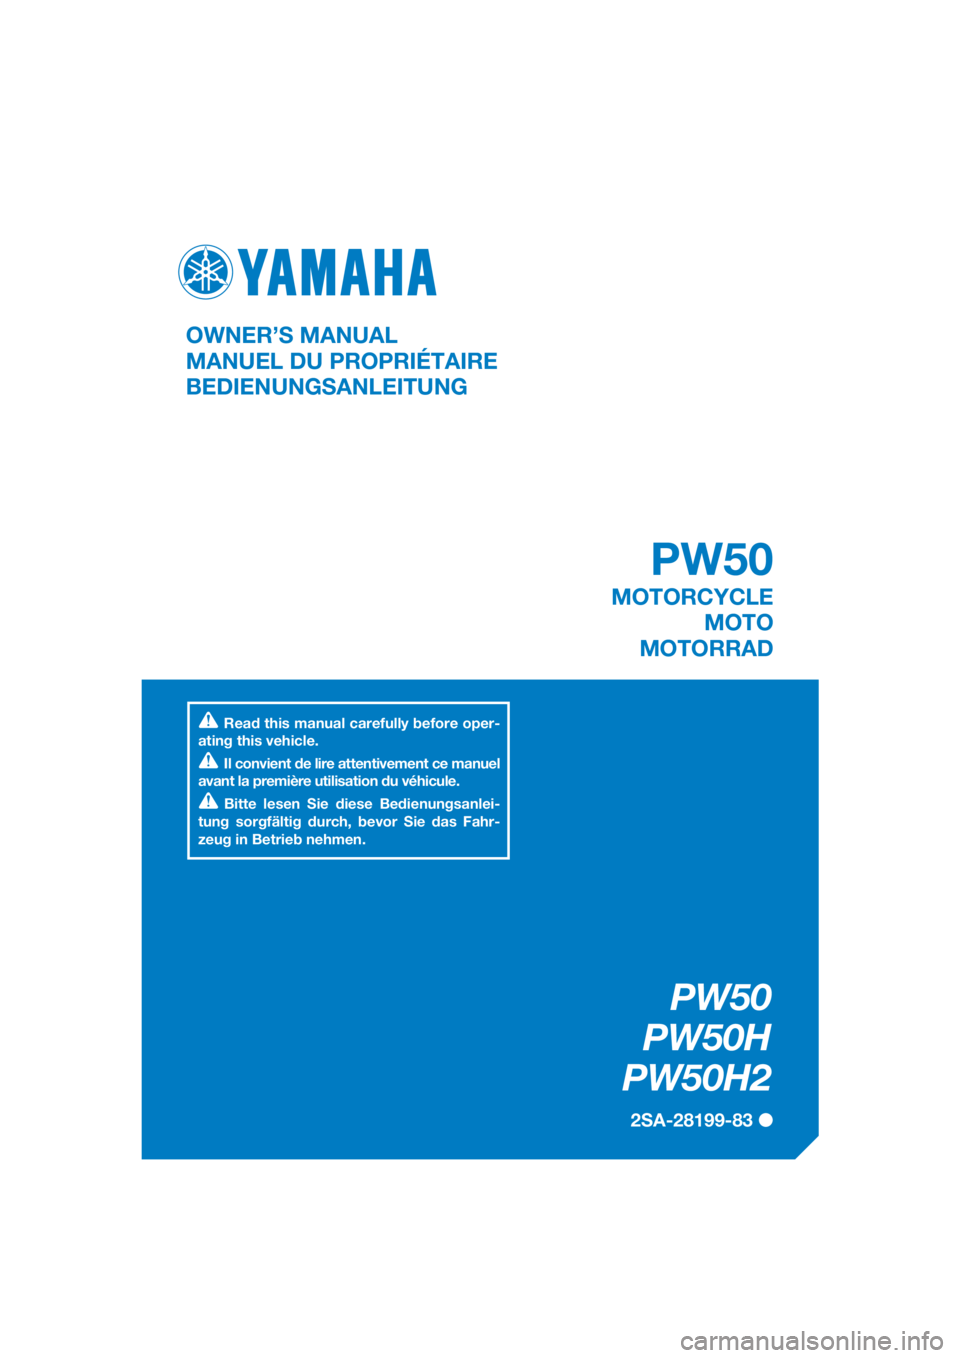 YAMAHA PW50 2017  Owners Manual DIC183
PW50
PW50H
PW50H2
2SA-28199-83
OWNER’S MANUAL
MANUEL DU PROPRIÉTAIRE
BEDIENUNGSANLEITUNG
Read this manual carefully before oper-
ating this vehicle.
Il convient de lire attentivement ce manu